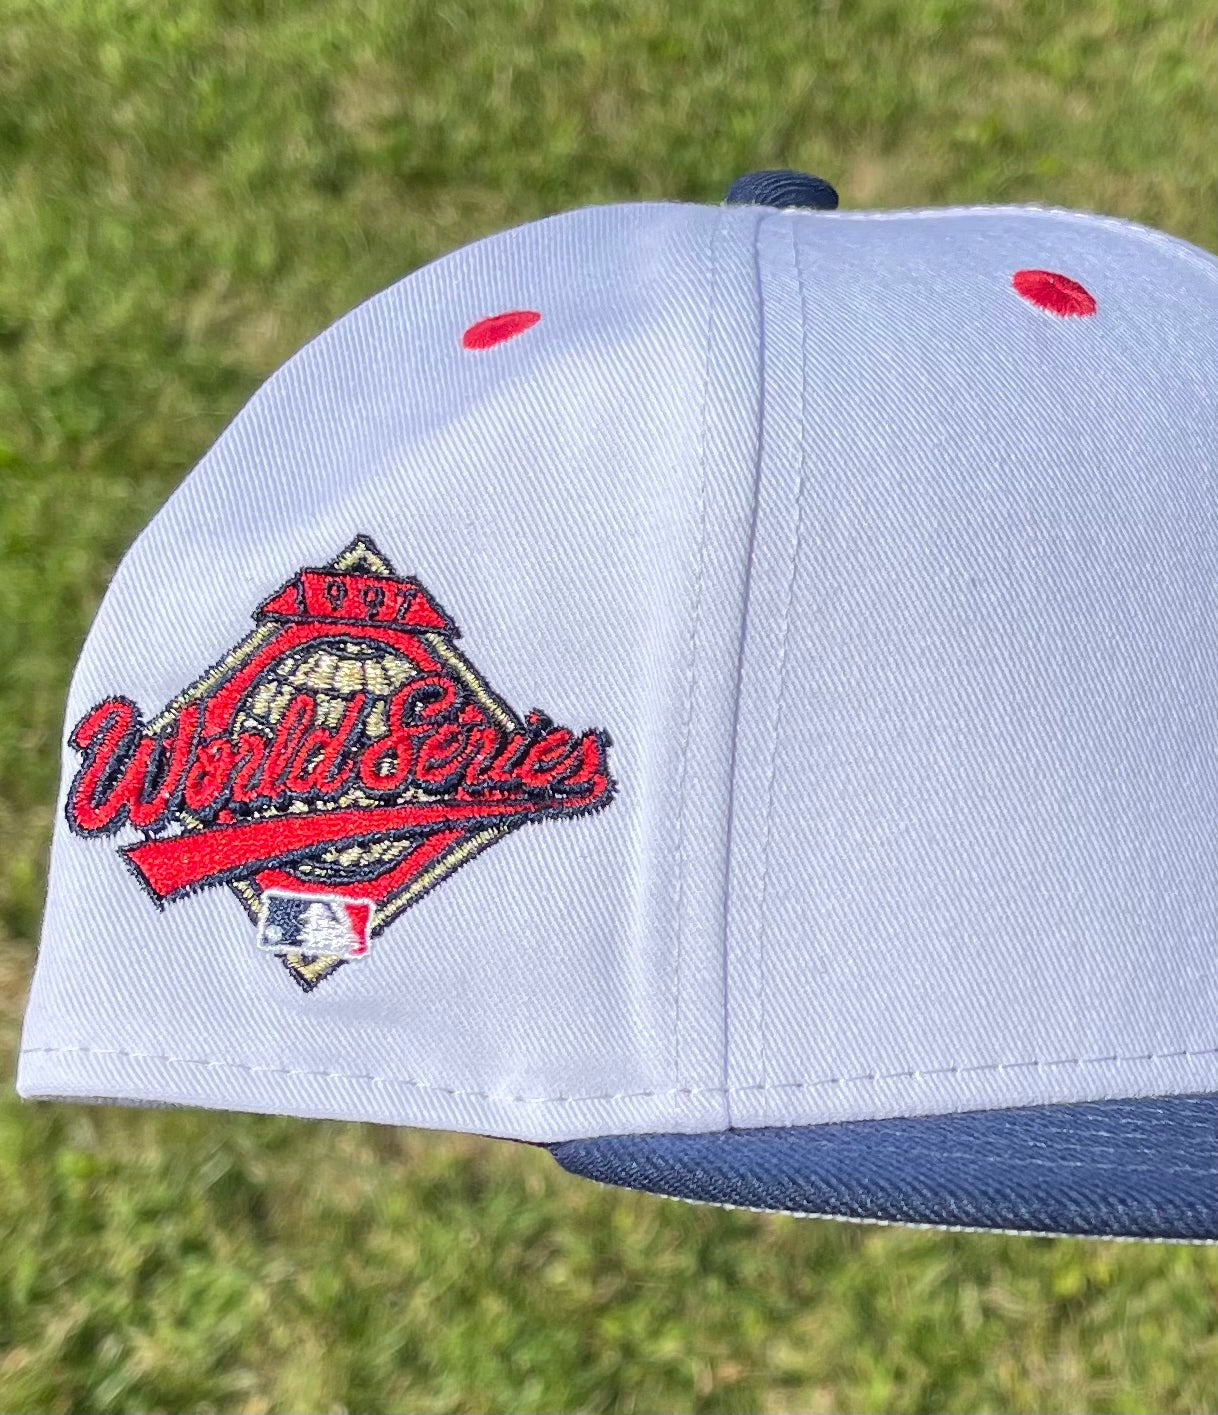 Cleveland Indians Chief Wahoo Banned Logo Two Tone 1997 World Series Fitted (White/Navy Blue) + Free Pin